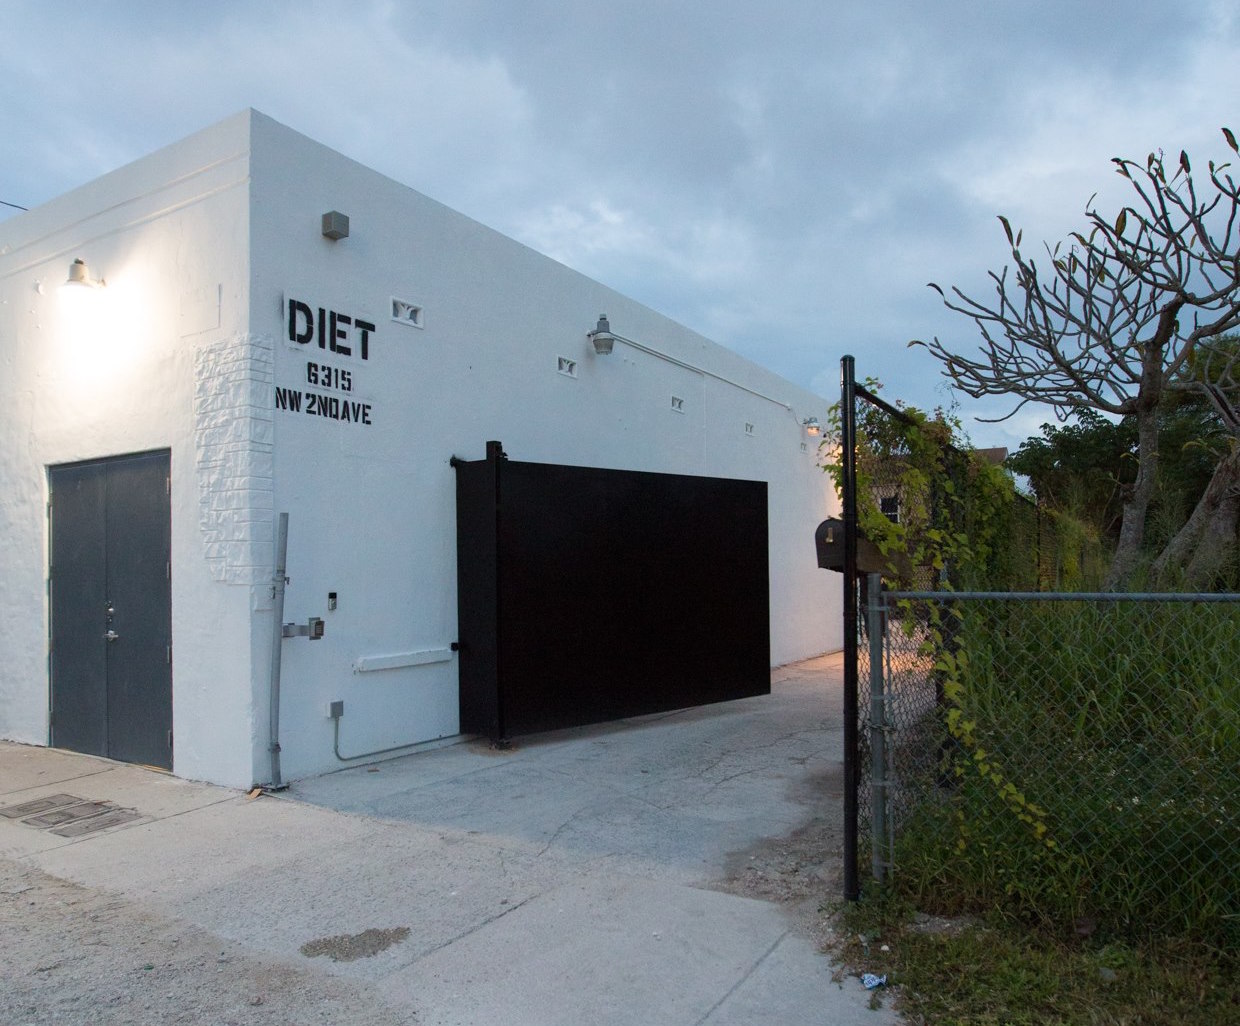 Sick of Rising Rents, Gentrification, Some Miami Art Galleries Are Buying Their Own Spaces